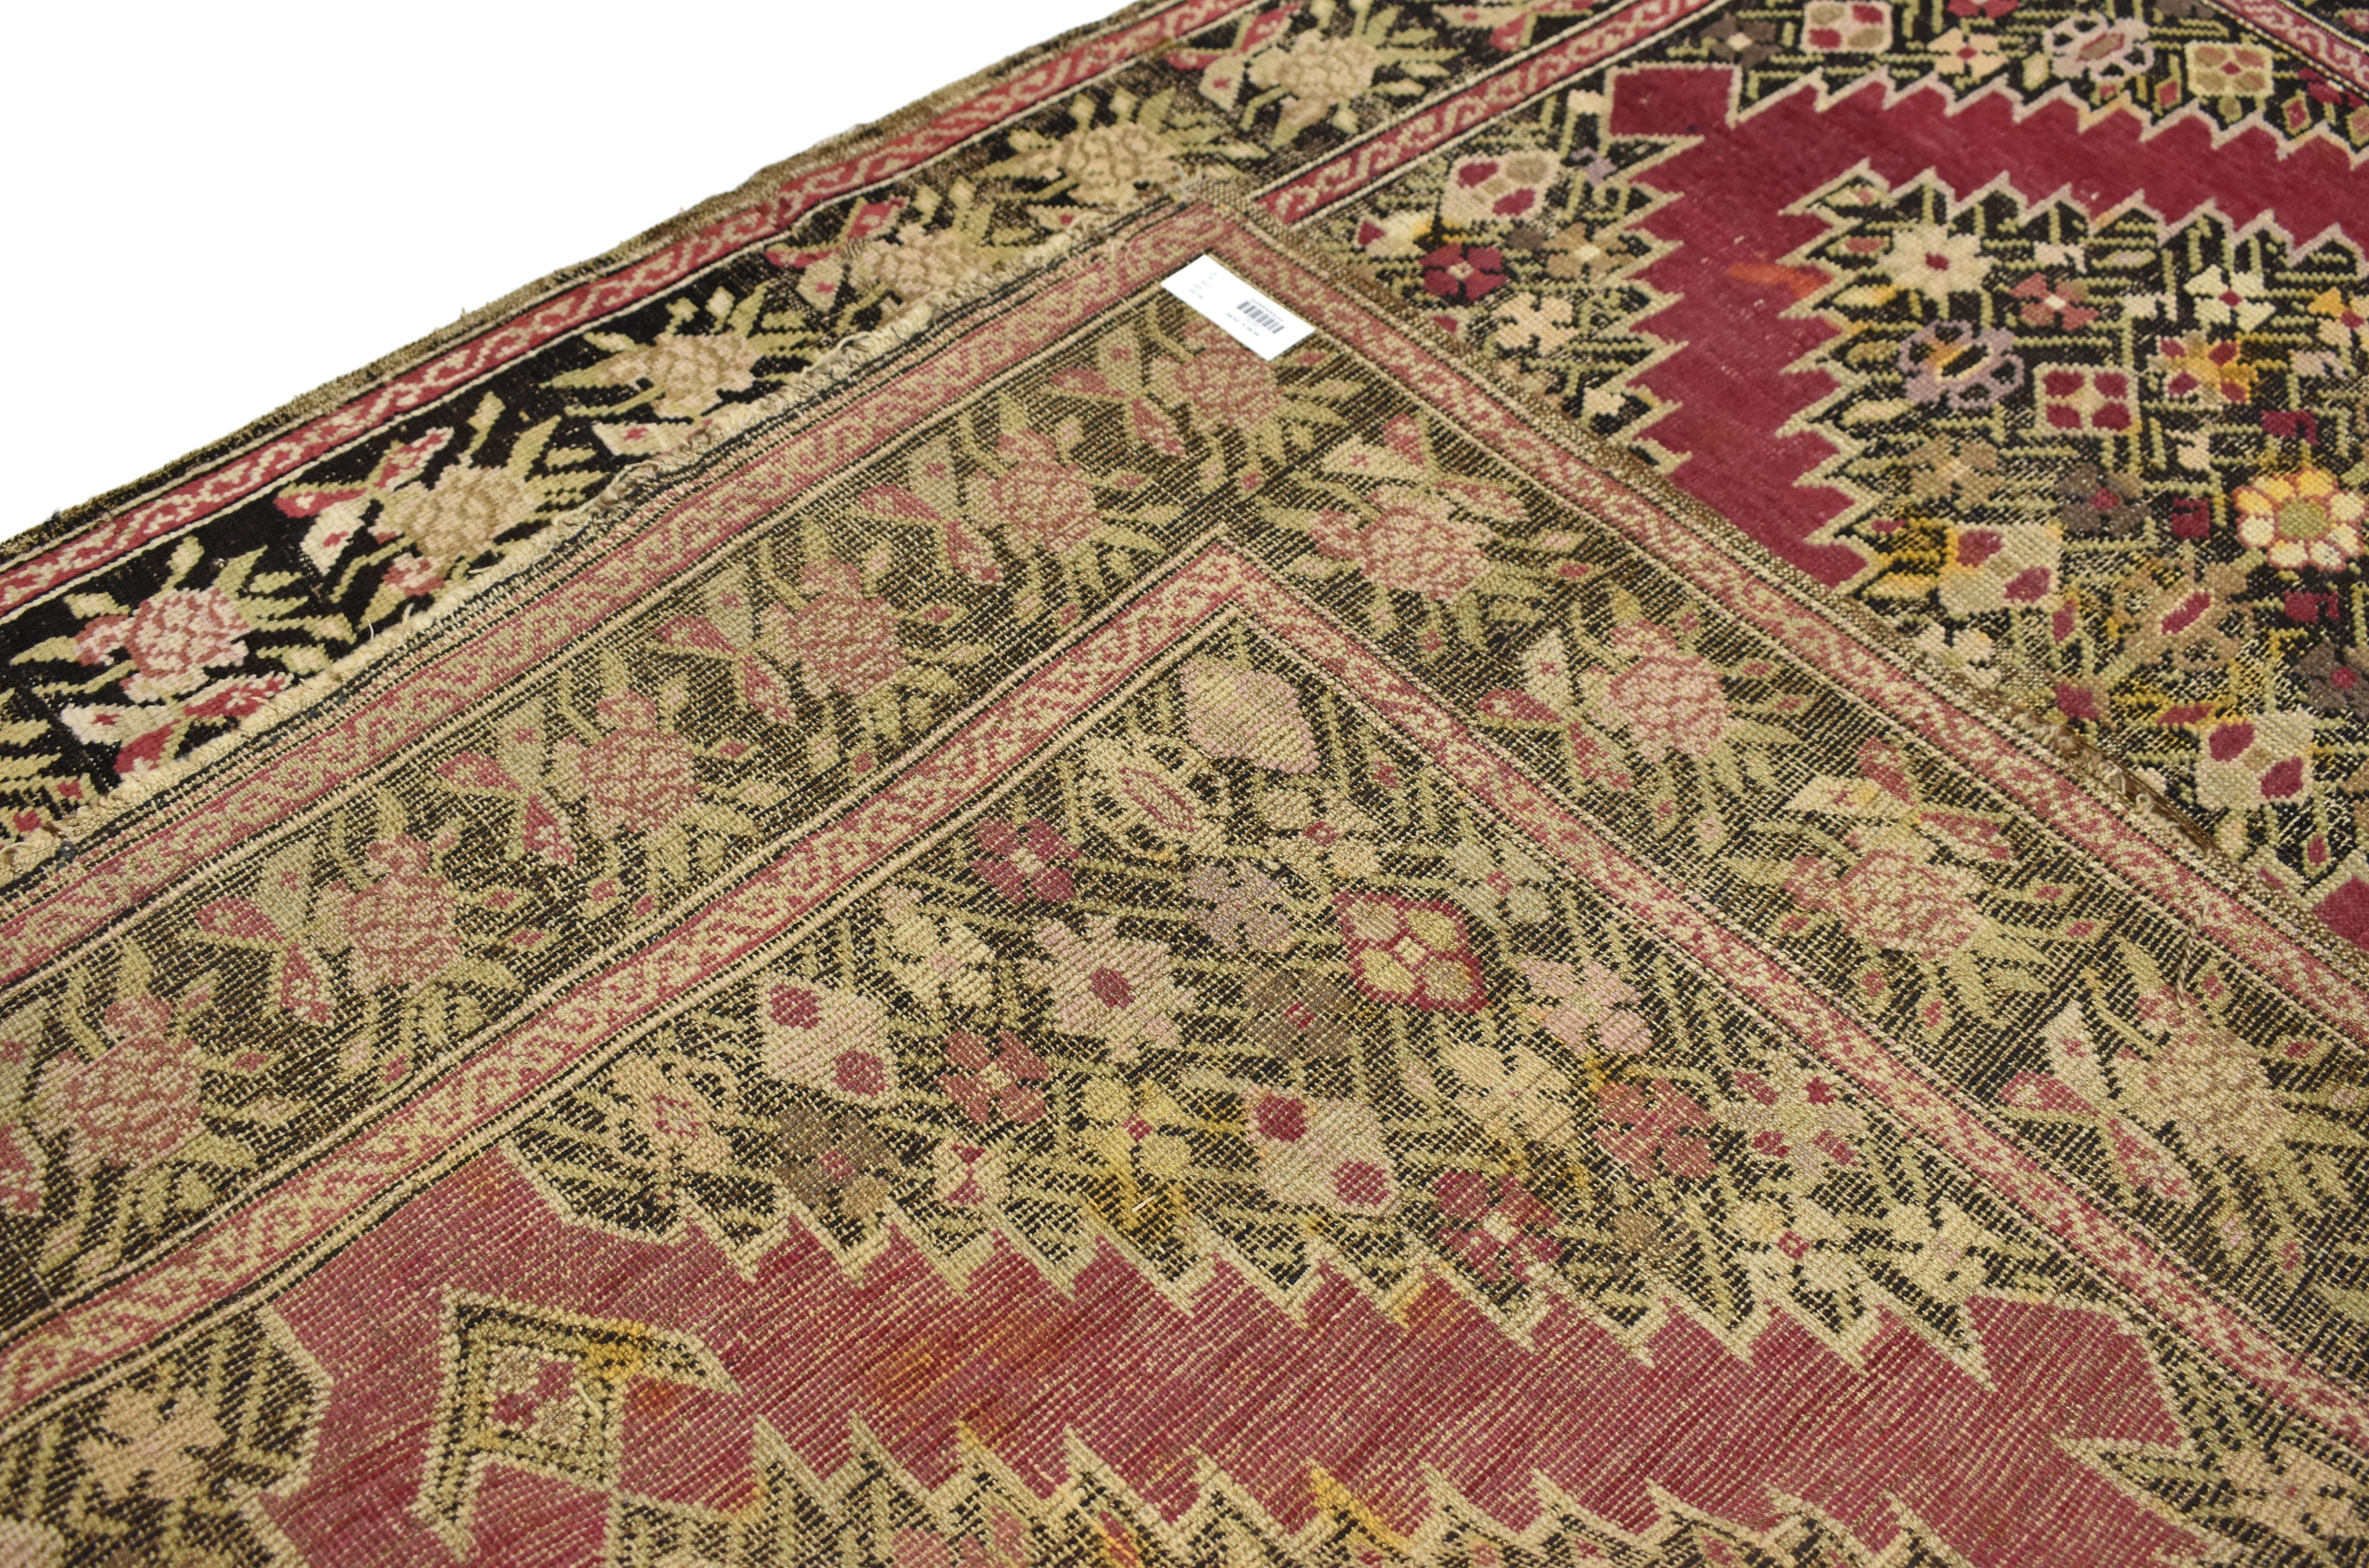 Antique Persian Karabakh Rug, Persian Gharabagh Accent Rug with Old World Style In Good Condition For Sale In Dallas, TX